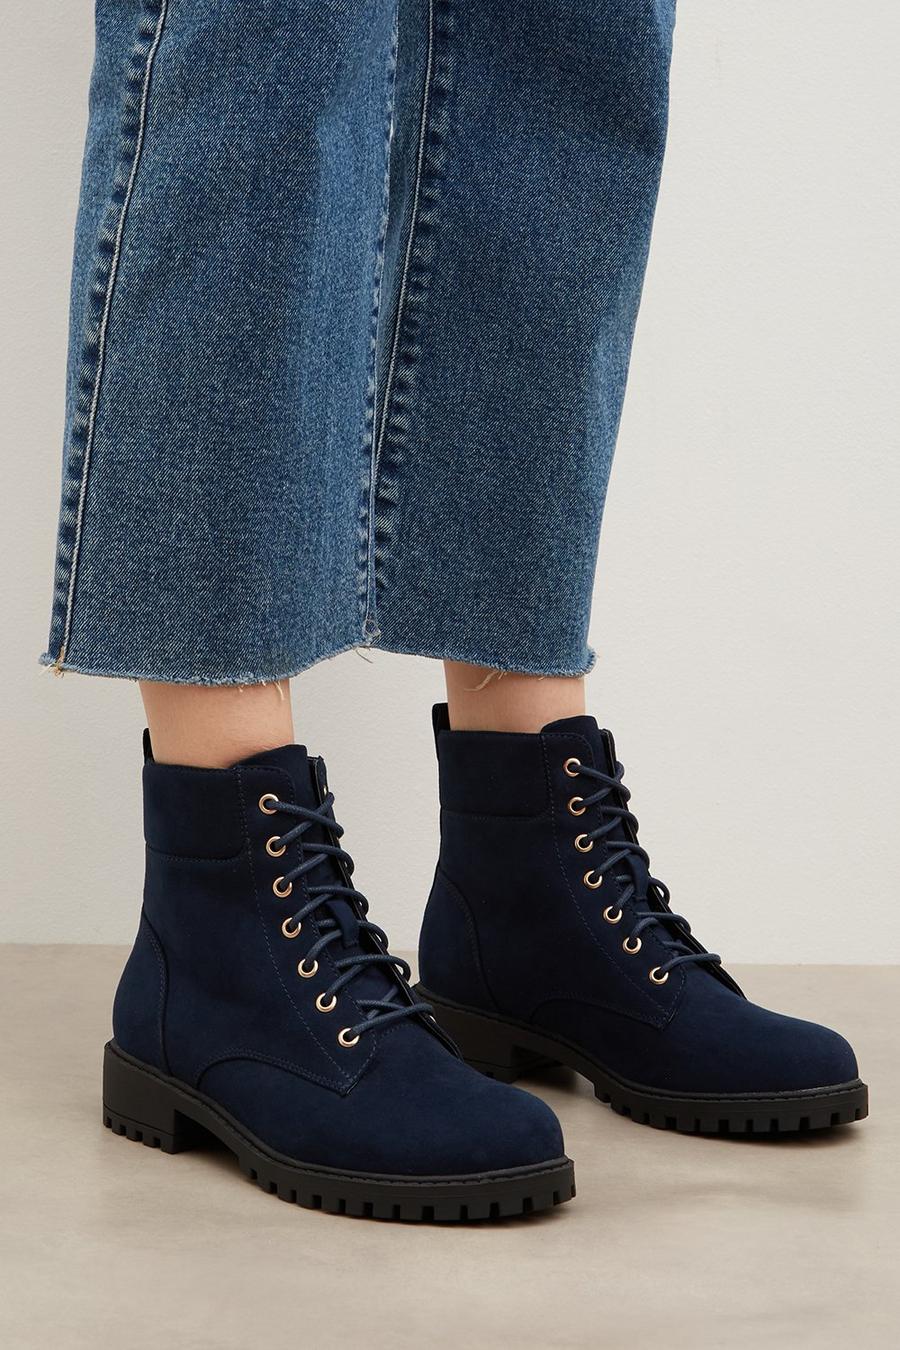 Good For The Sole: May Comfort Lace Up Boots